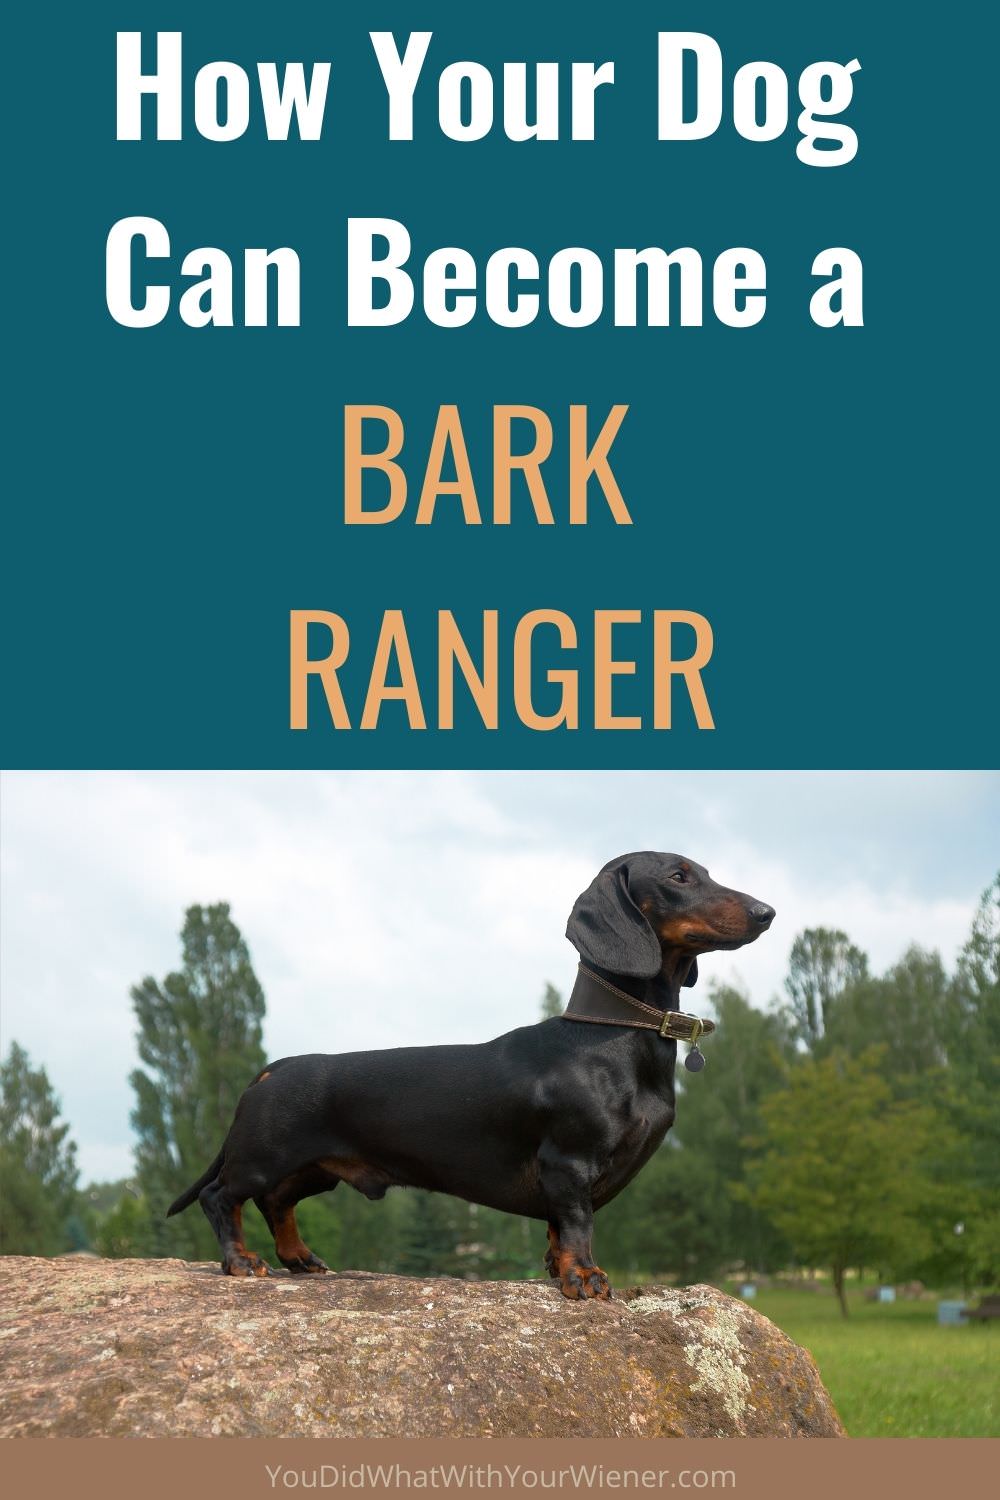 Are you interested in your dog becoming a BARK ranger? Here's everything you need to know about it.